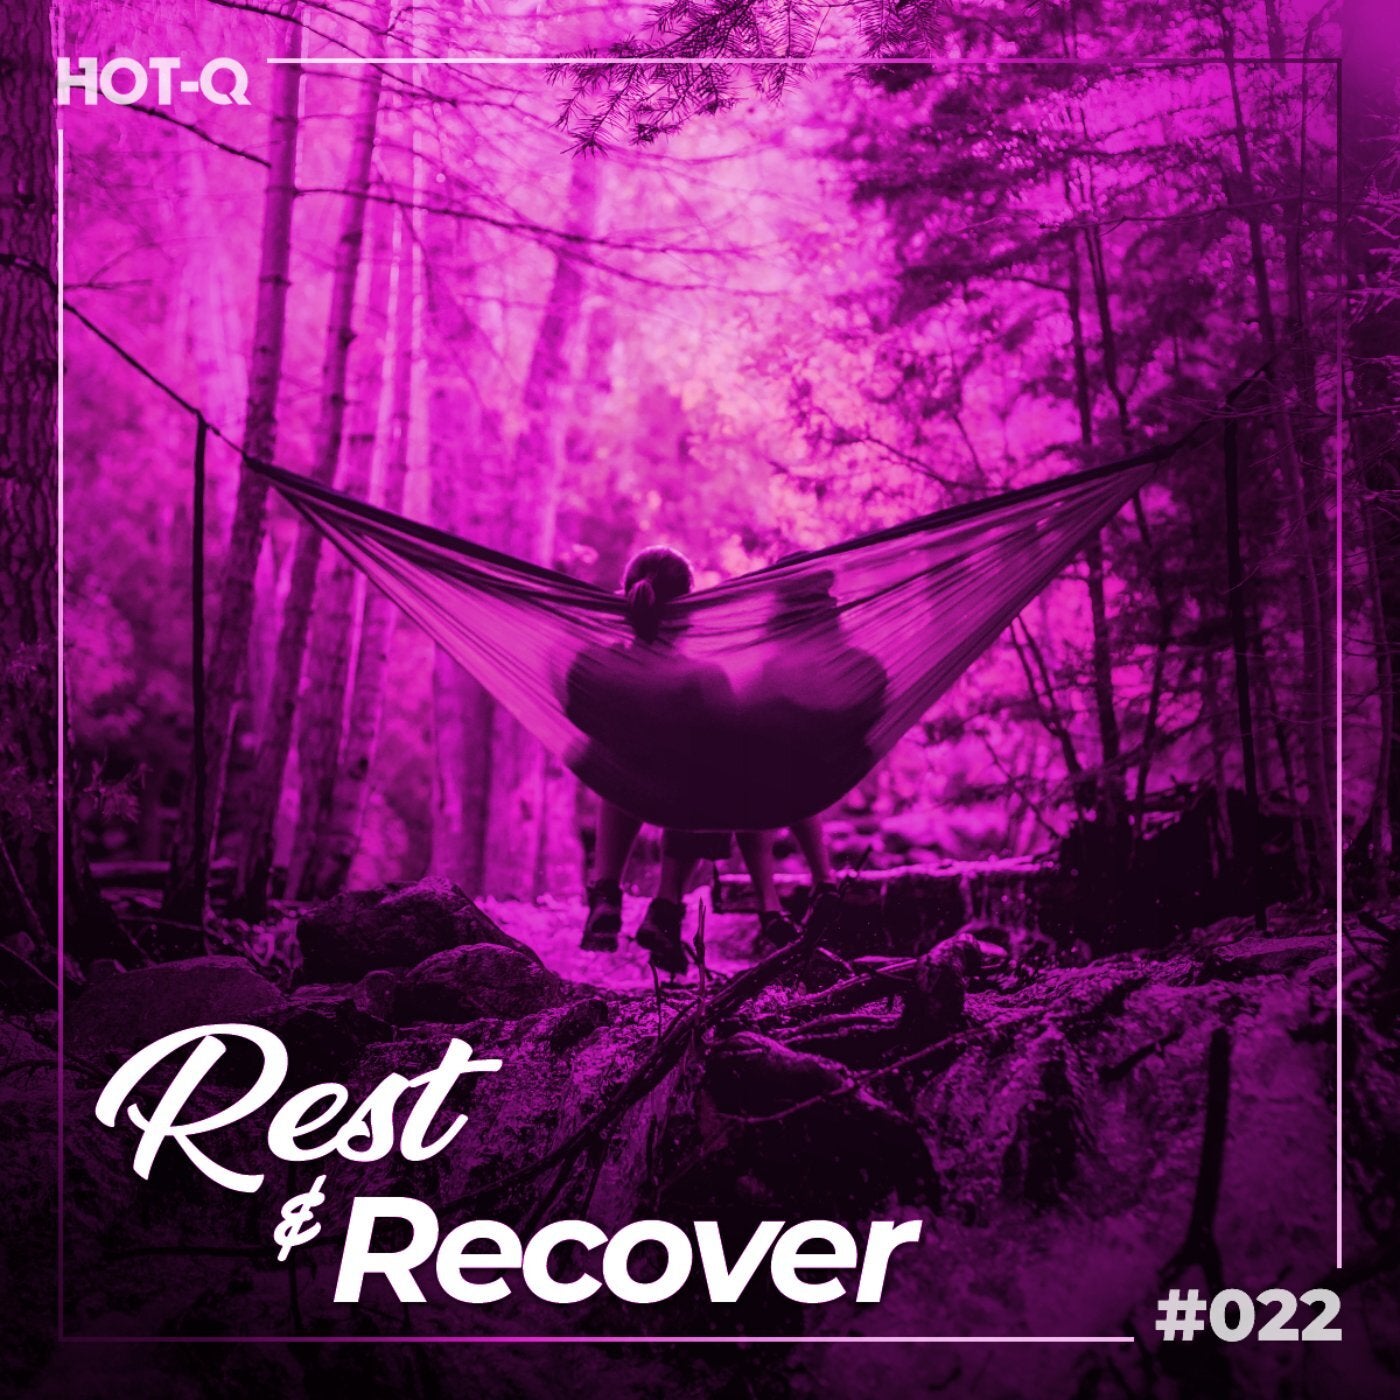 Rest & Recover 022